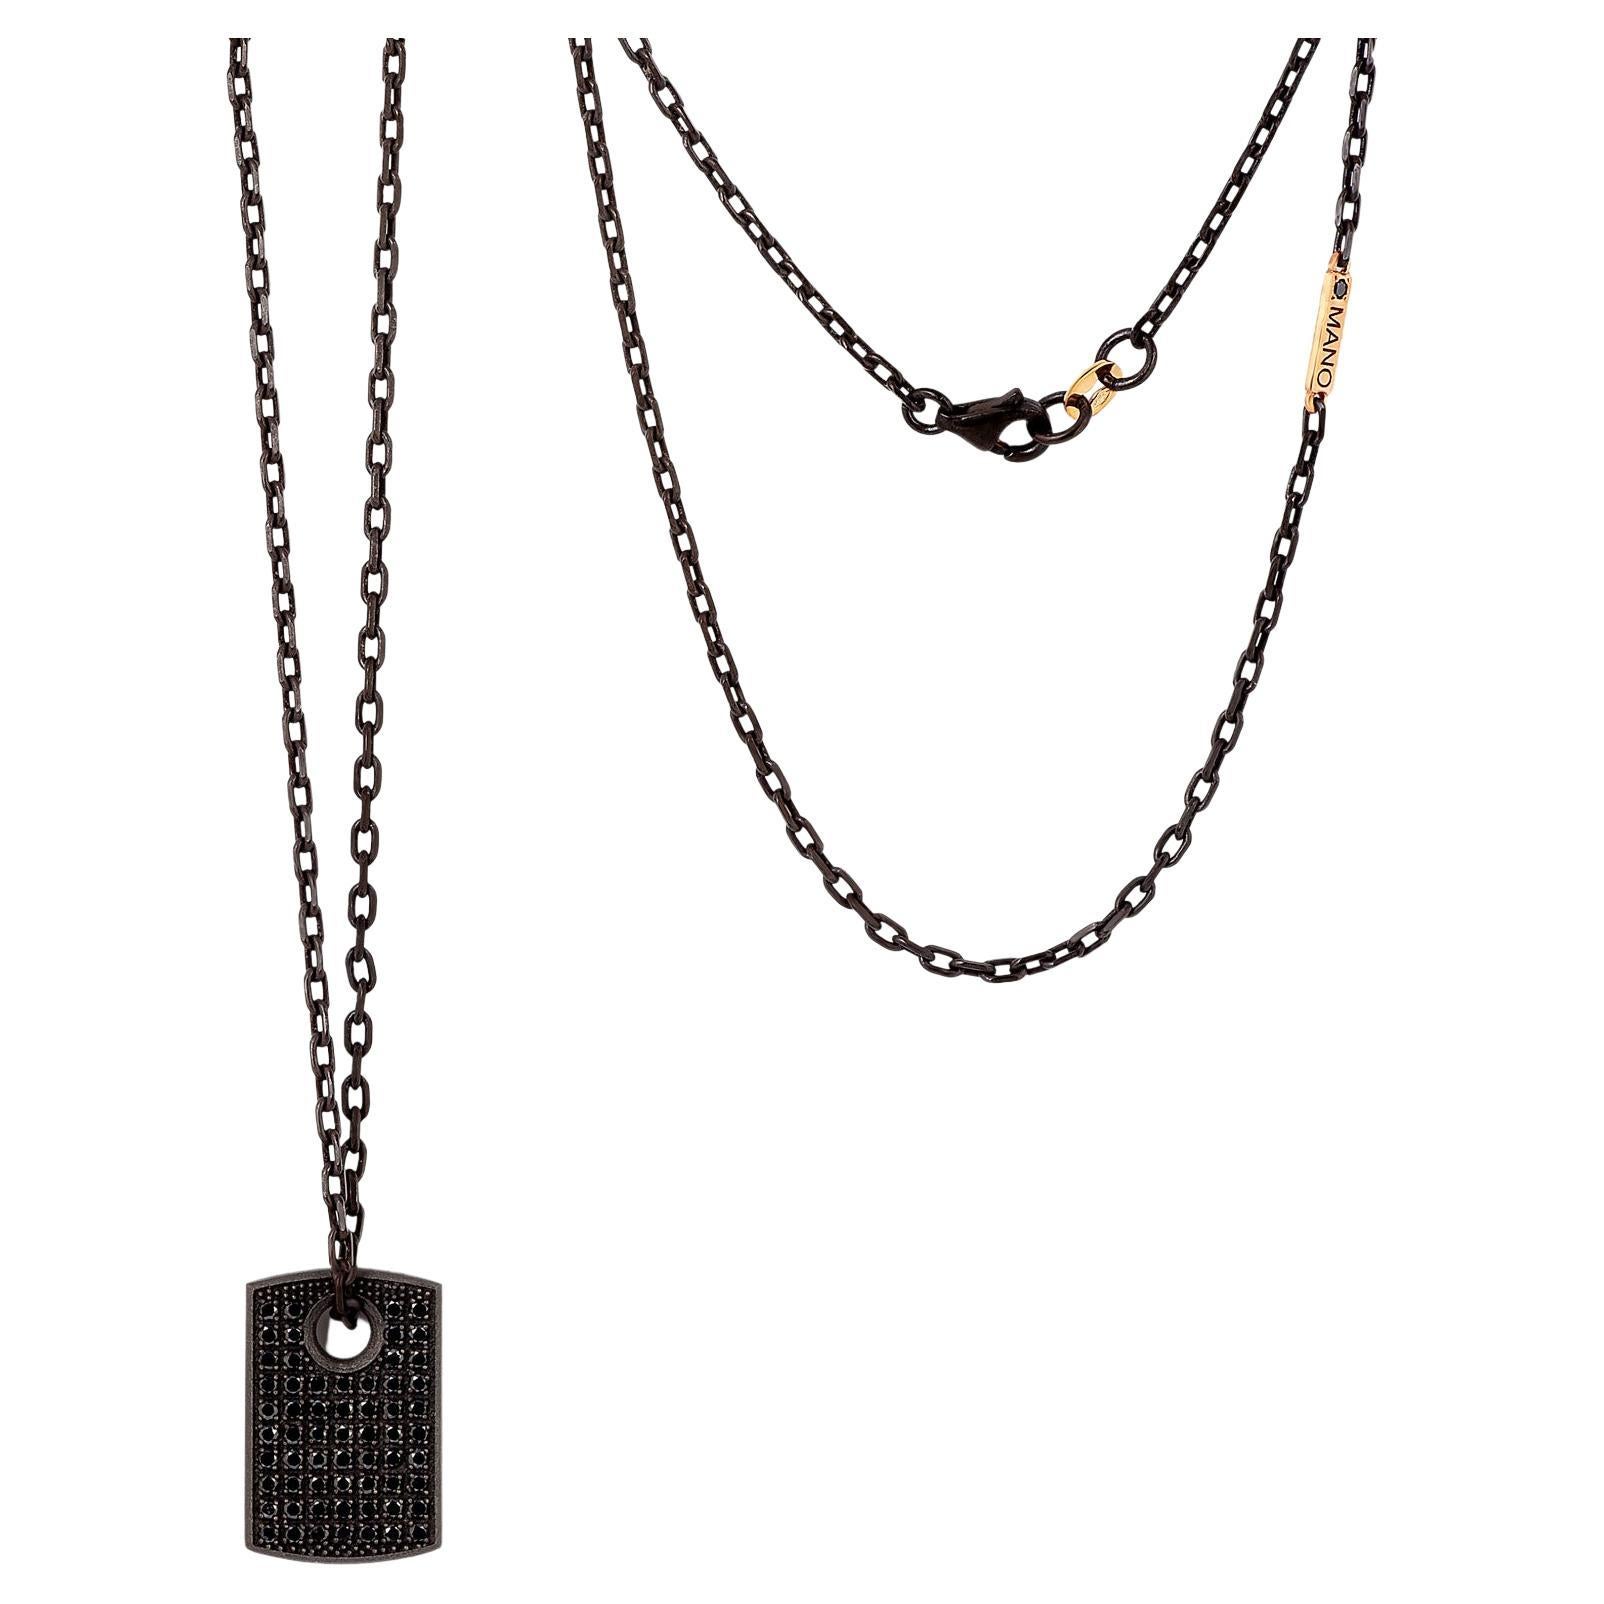 Men's Necklace Small Titanium Plate, Black Diamonds, 18 Kt and 9kt Redgold Chain